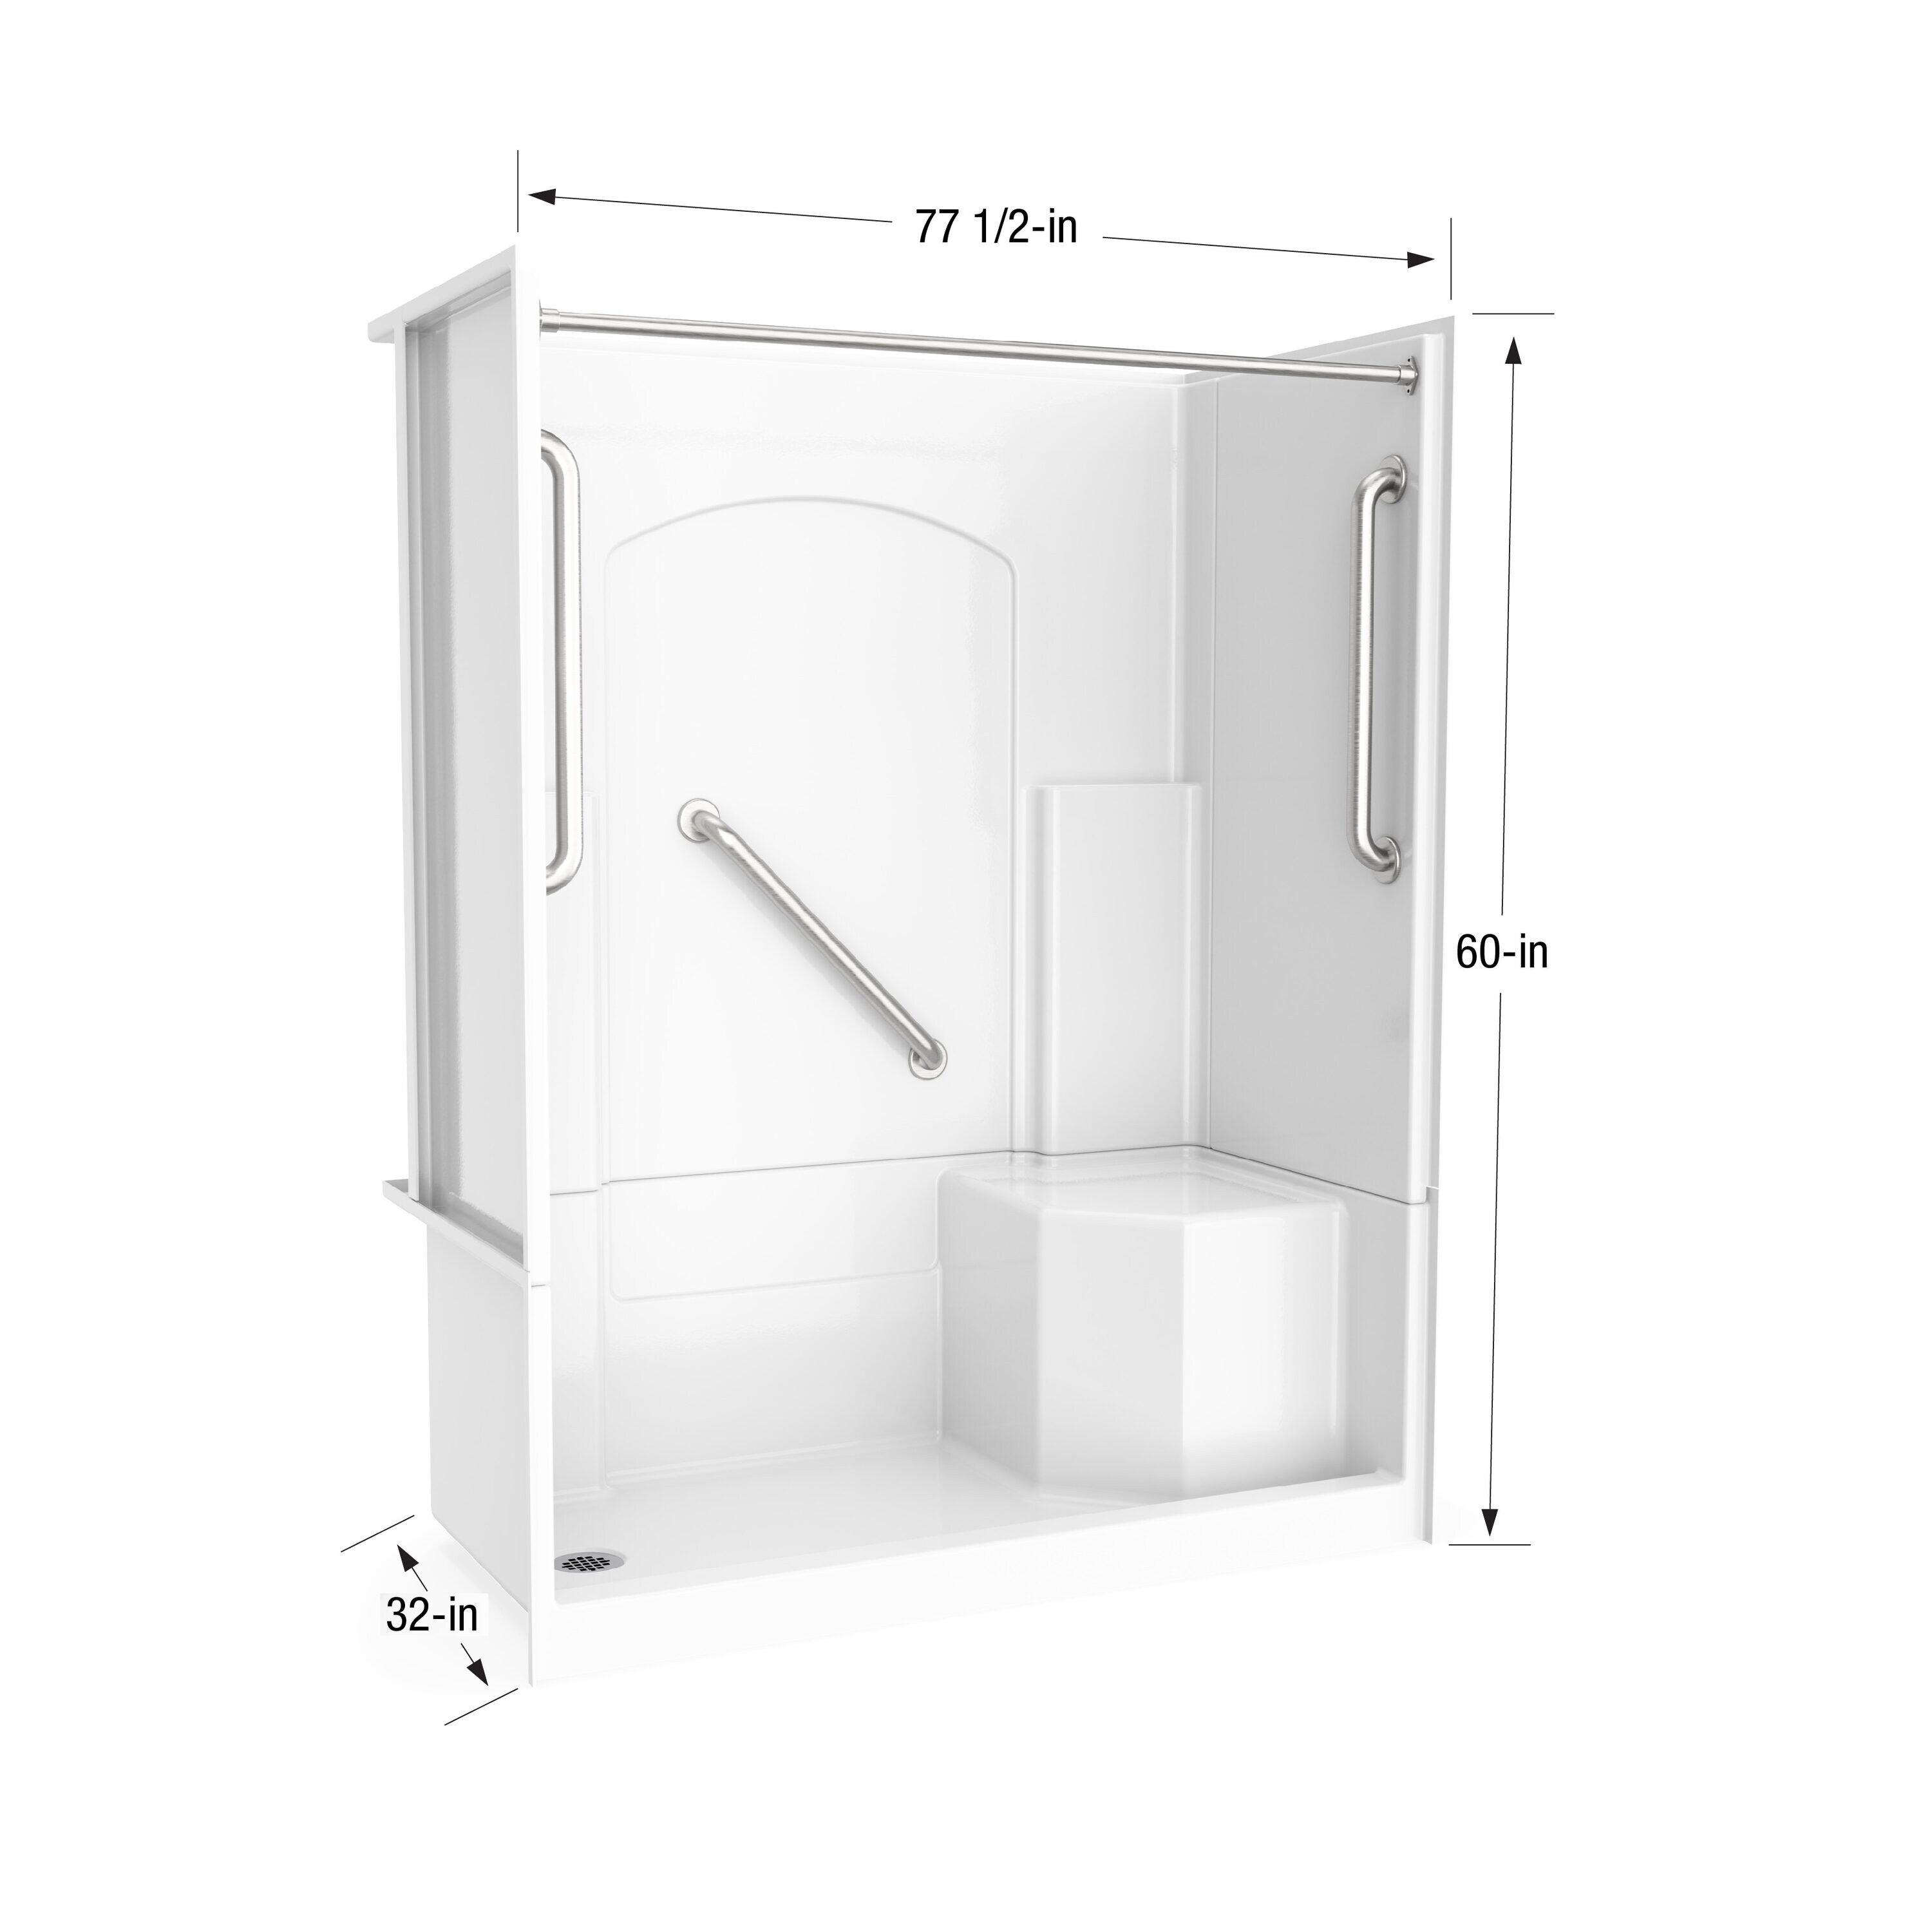 Laurel Mountain Ramer Low Threshold White 4-Piece 60-in x 32-in x 77-in Base/Wall Alcove Shower Kit with Integrated Seat (Right Drain) Drain Included